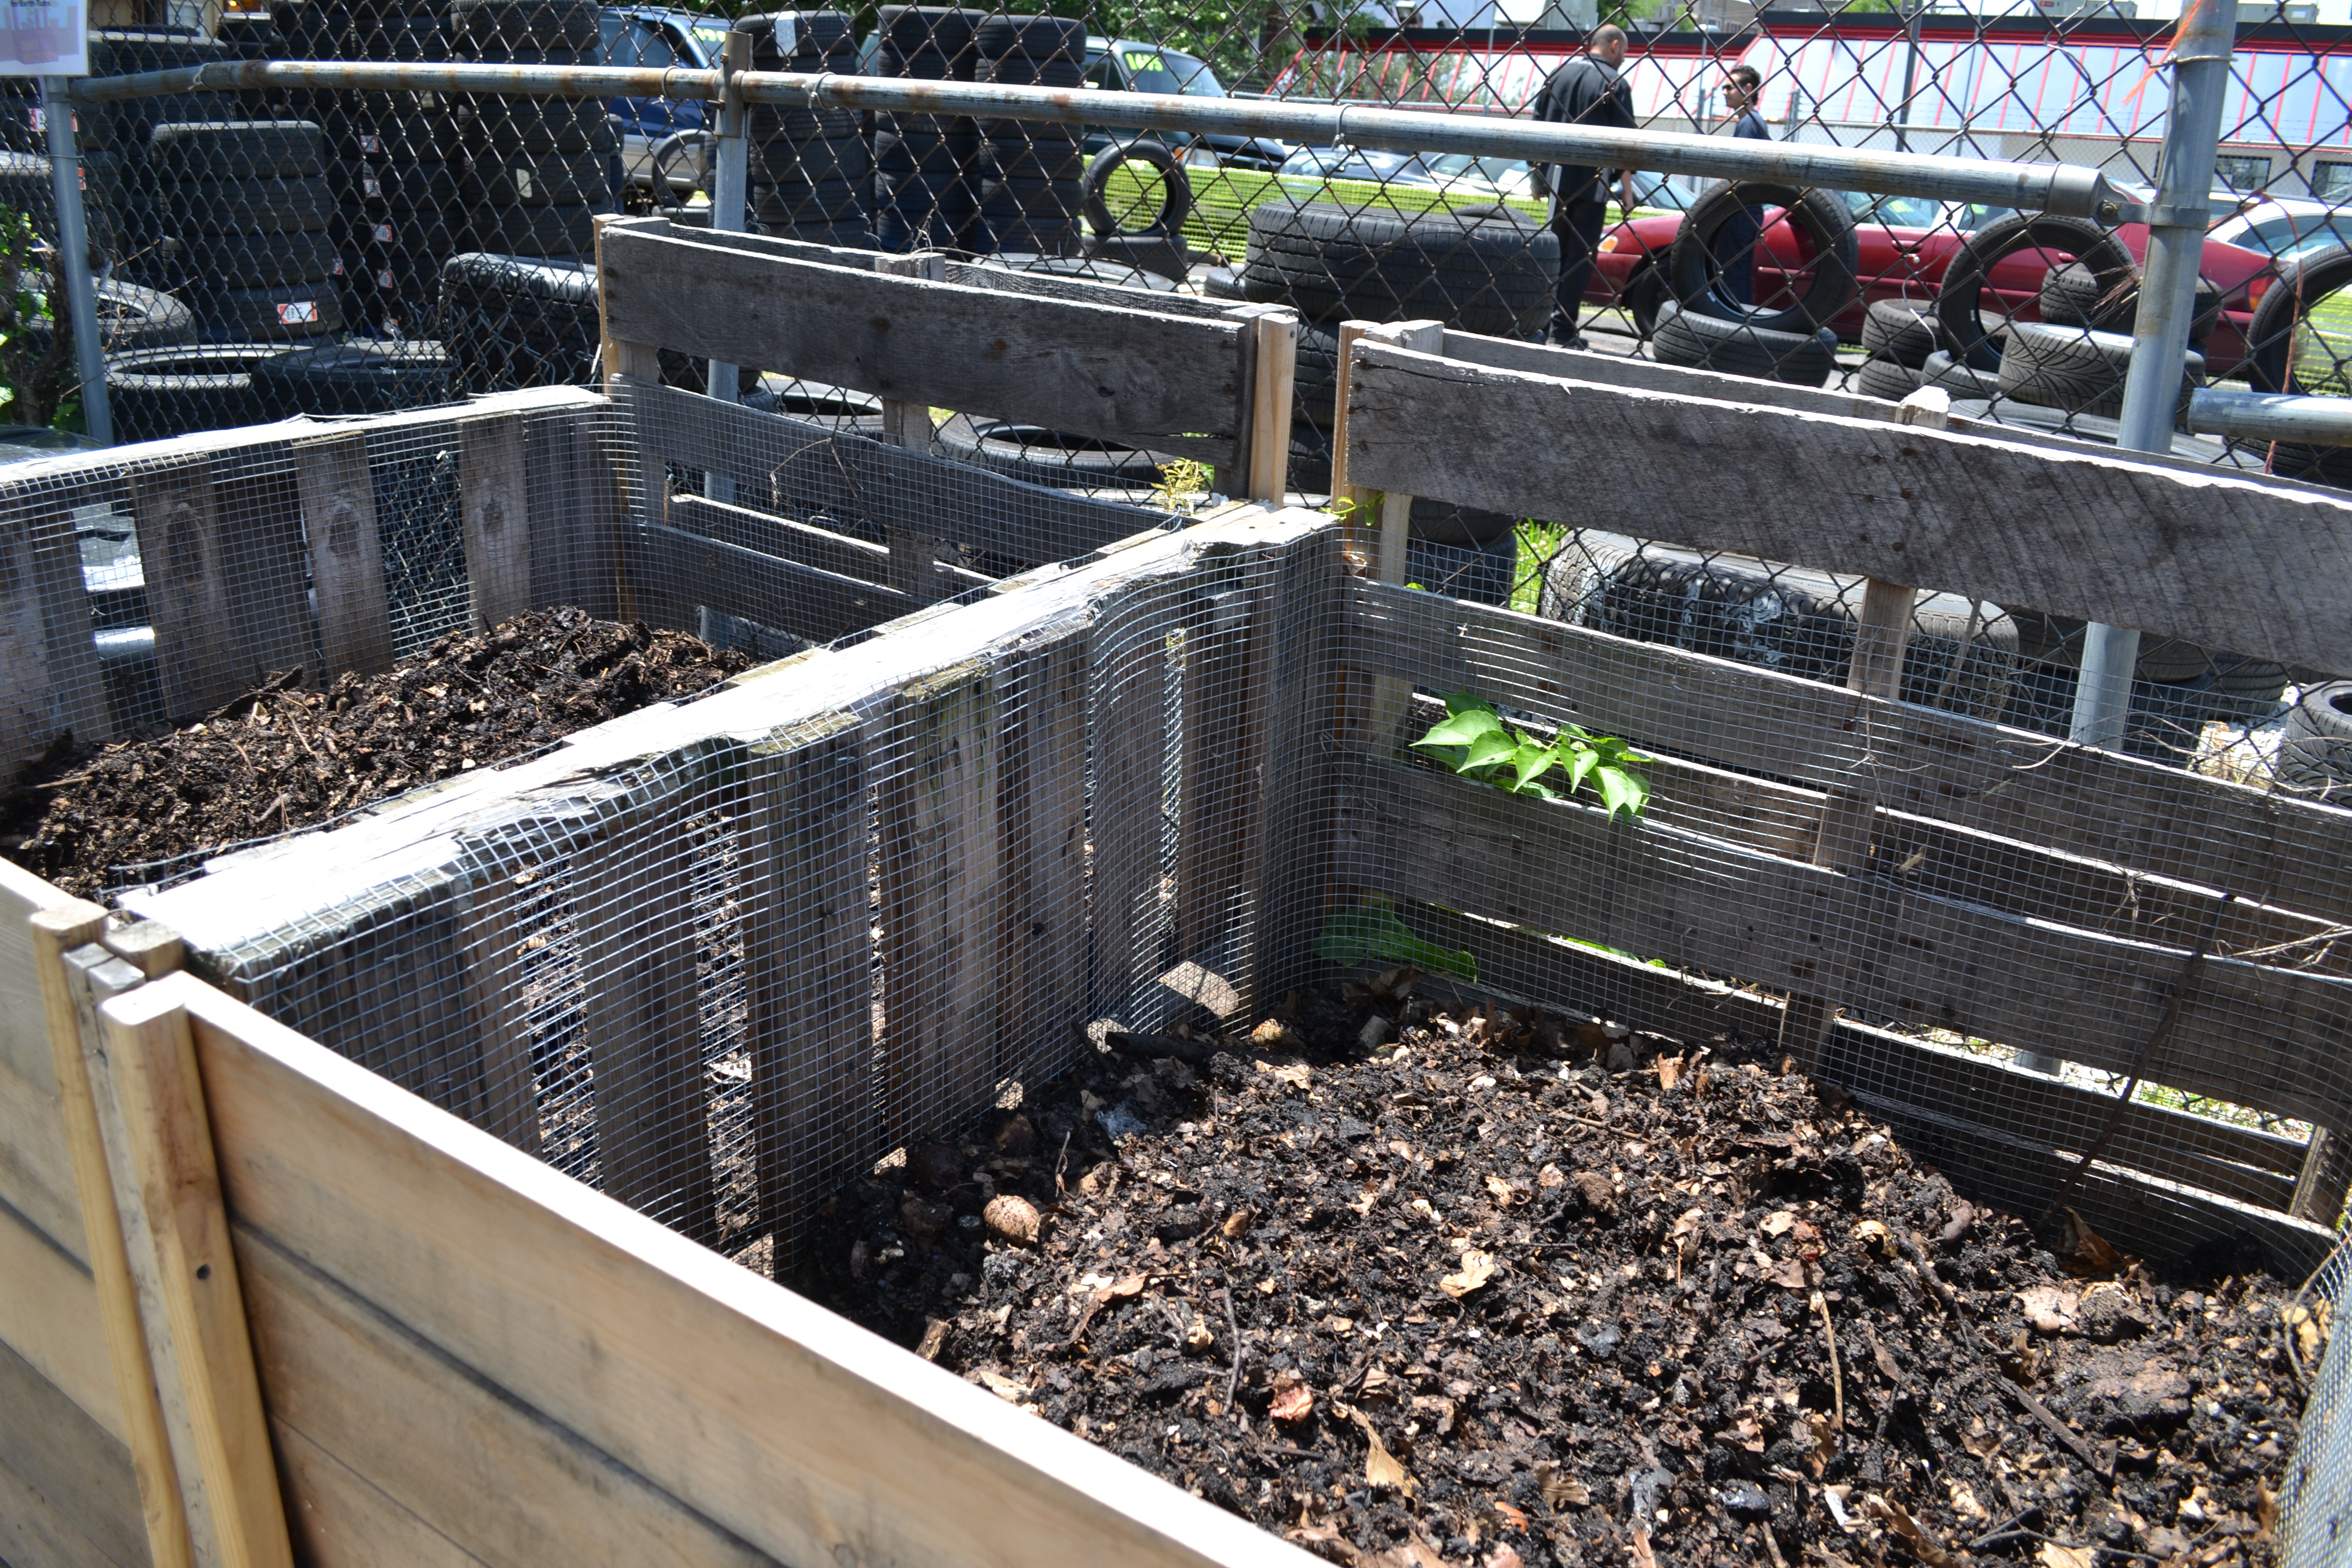 The Dirt Factory turns food scraps, leaves and other organic material into nutrient-rich compost for neighborhood gardens